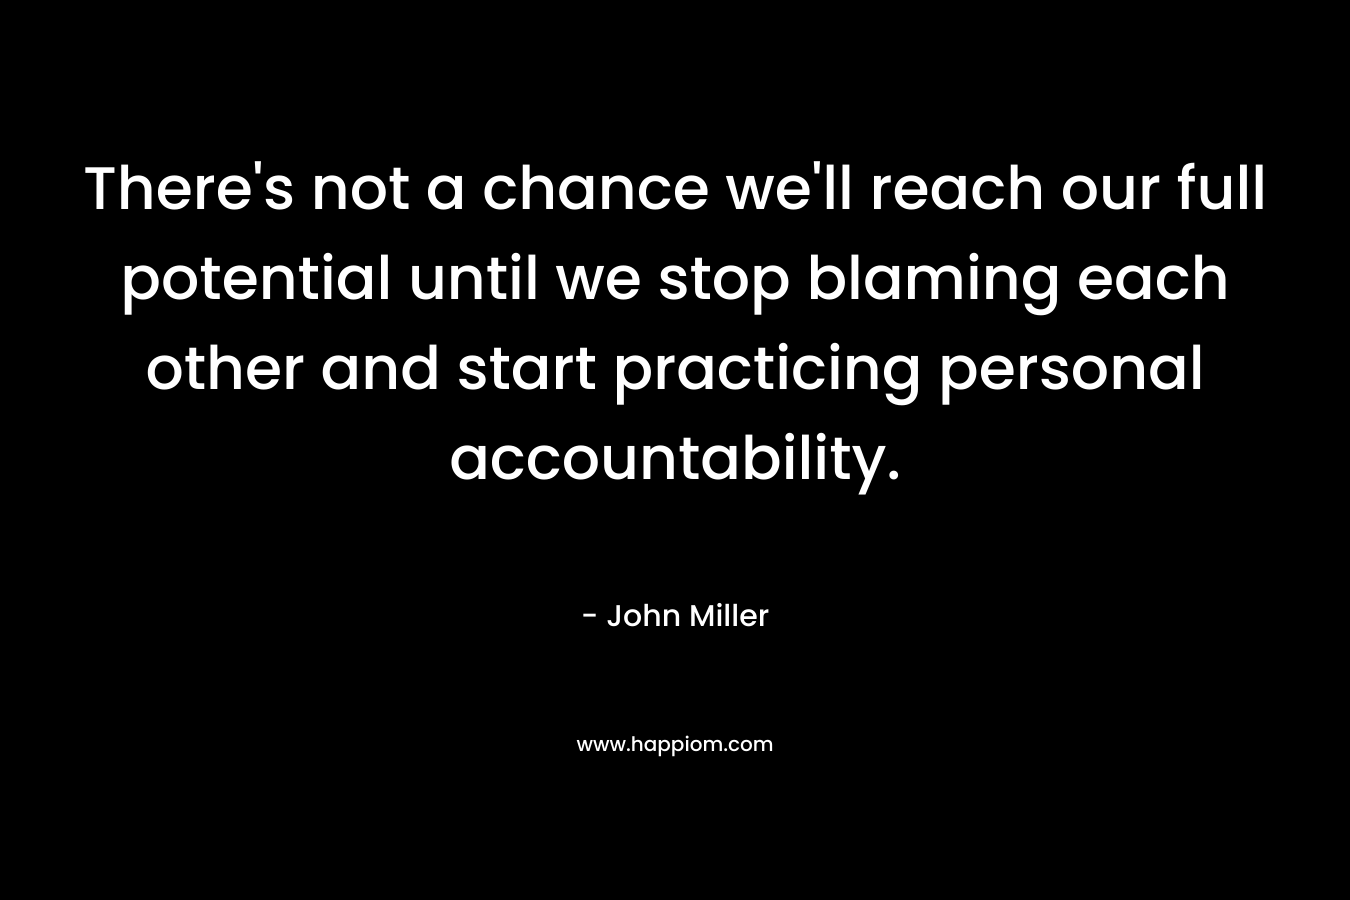 There’s not a chance we’ll reach our full potential until we stop blaming each other and start practicing personal accountability. – John Miller